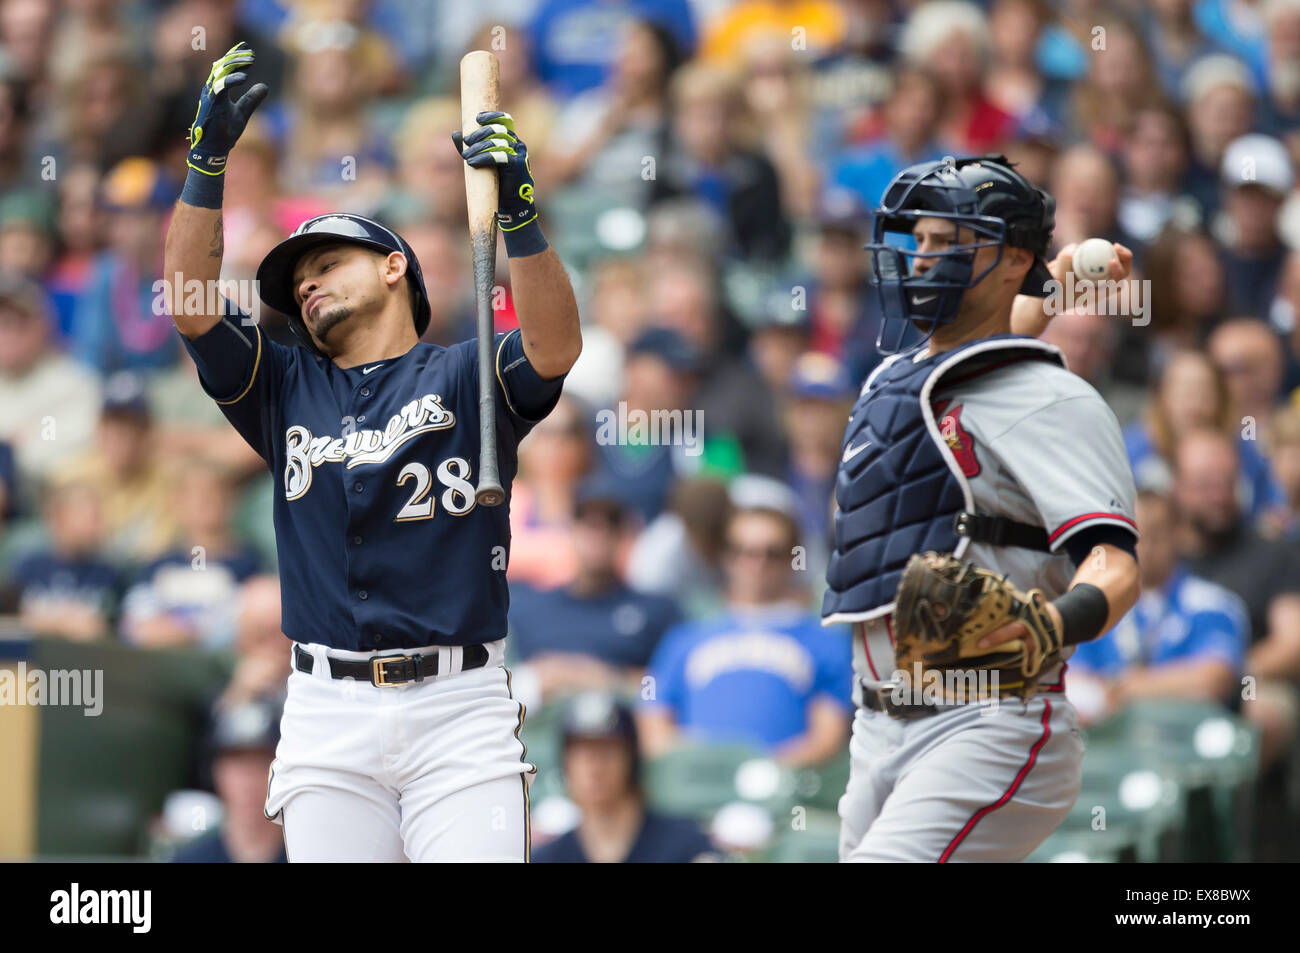 Milwaukee, WI, USA. 8th July, 2015. Milwaukee Brewers right fielder Gerardo Parra #28 reacts after a called check swing by the third base umpire during the Major League Baseball game between the Milwaukee Brewers and the Atlanta Braves at Miller Park in Milwaukee, WI. Brewers defeated the Braves 6-5. John Fisher/CSM/Alamy Live News Stock Photo